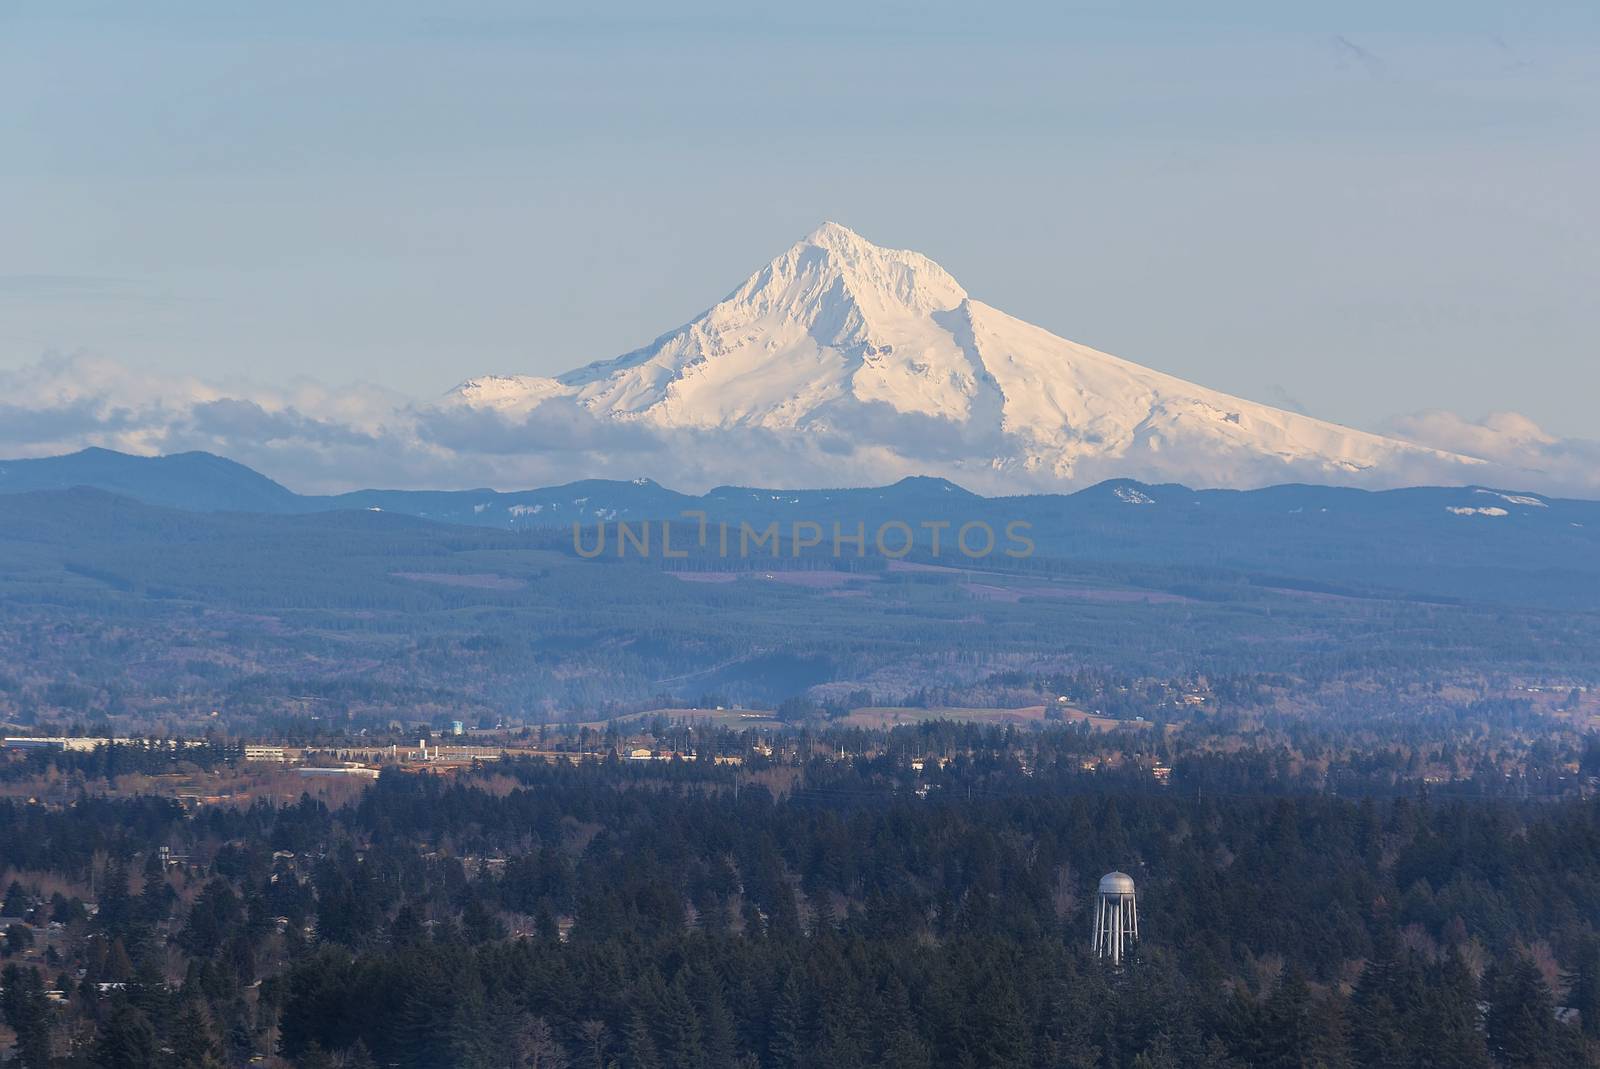 Snow Covered Mount Hood with Blue Sky by jpldesigns